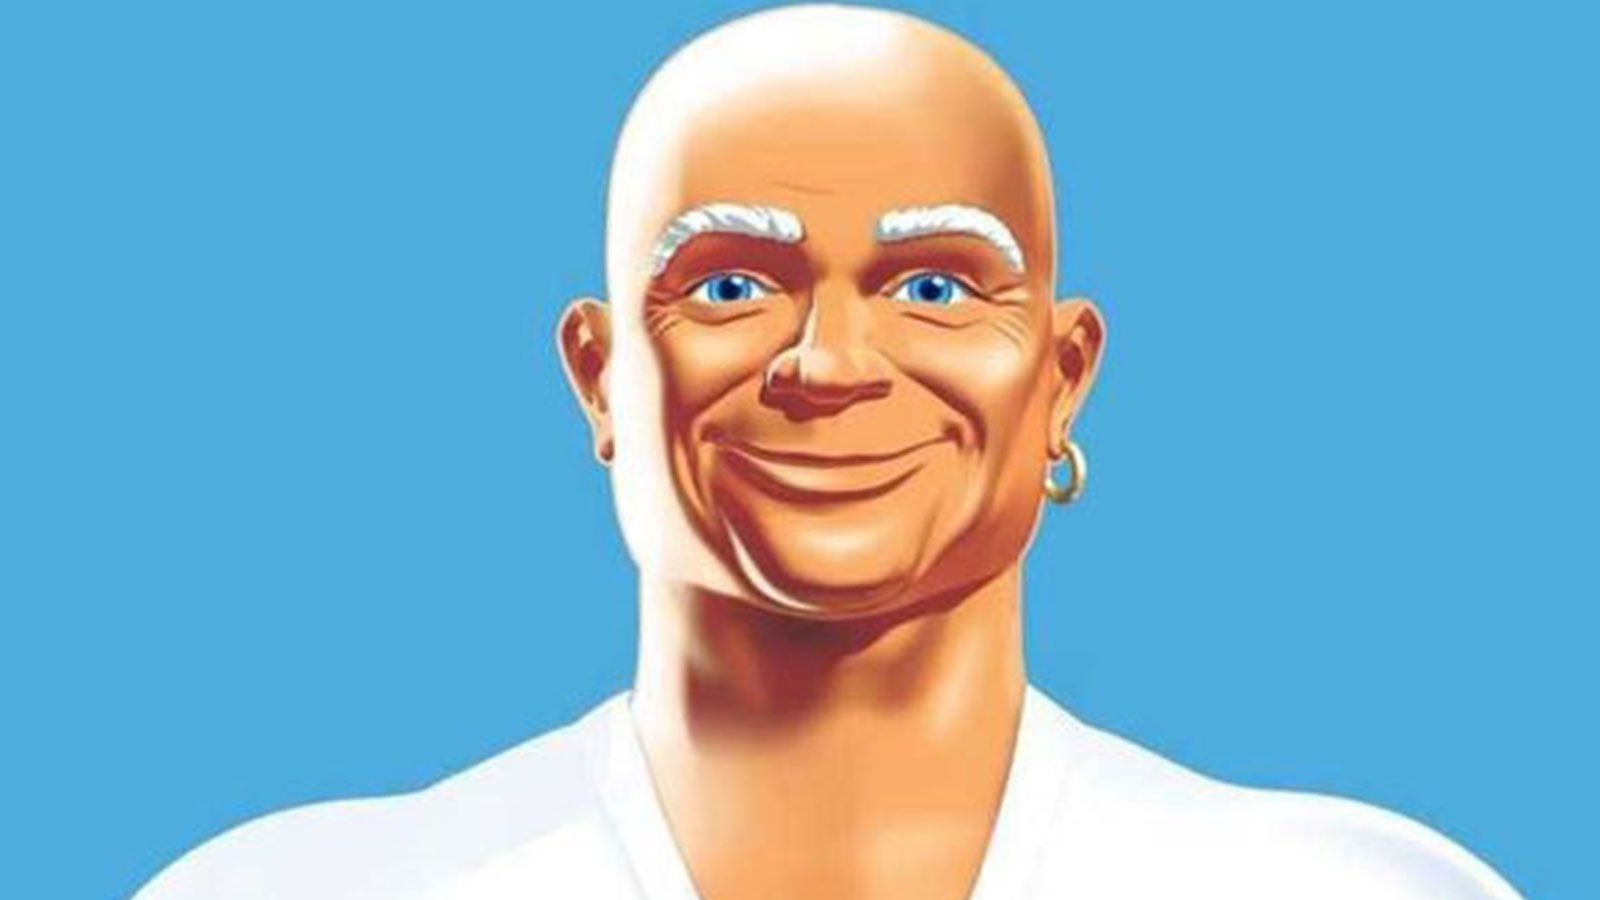 5390483 2000x1600 mr clean Free stock photos funny wallpapers cleaning  kid wallpaper funny backgrounds  Rare Gallery HD Wallpapers